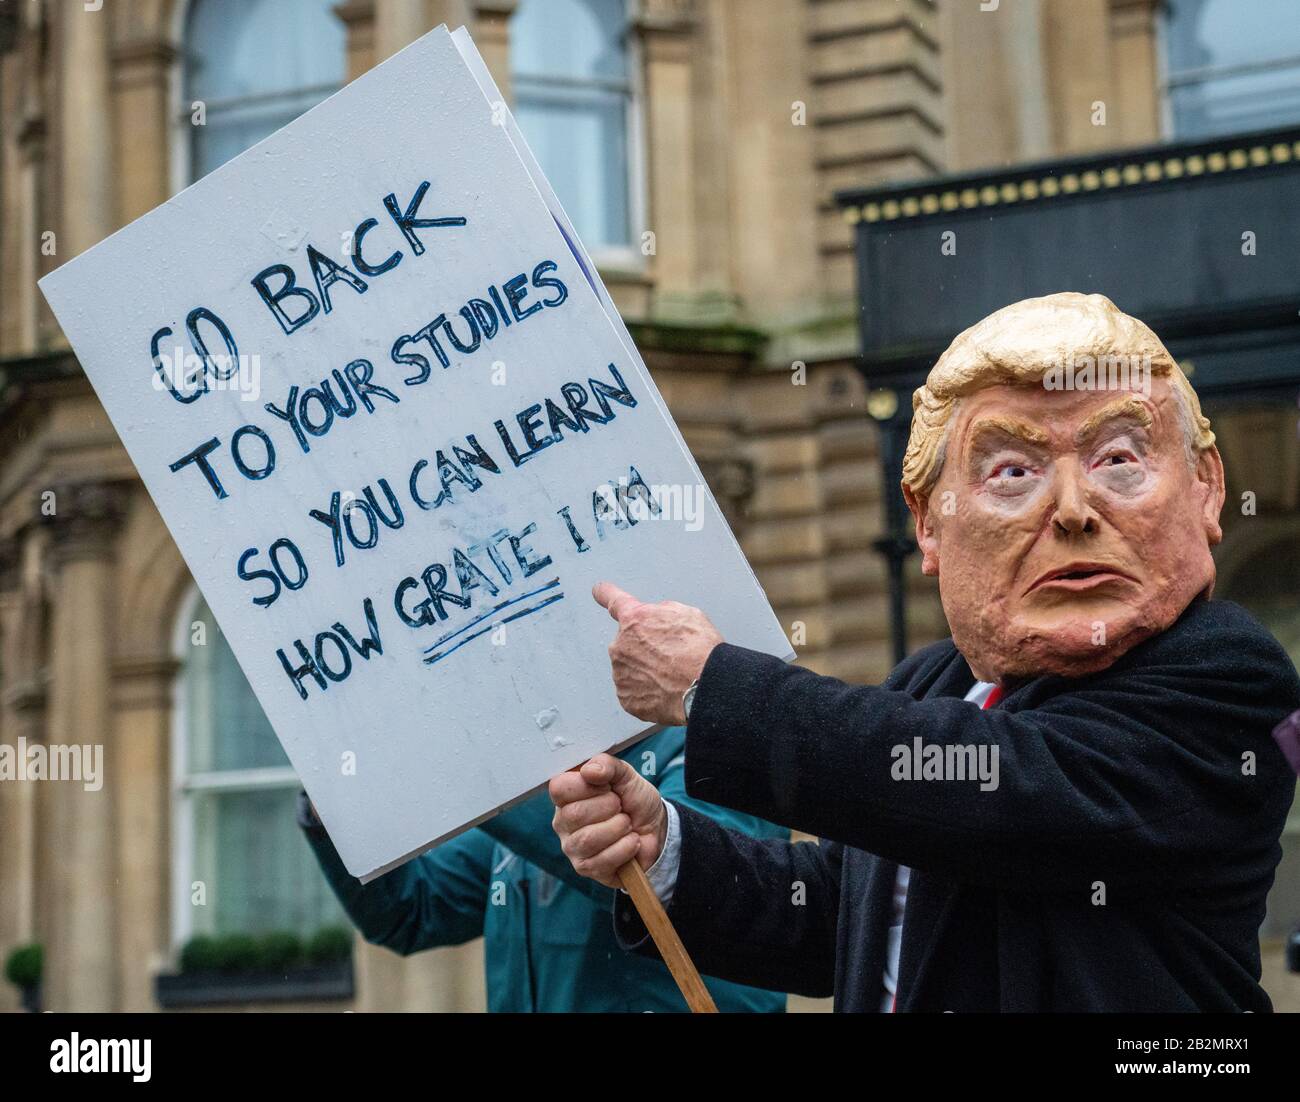 Man in a Donald Trump mask admonishing children for being on school strike on the Greta Thunberg March for Climate in Bristol UK Stock Photo